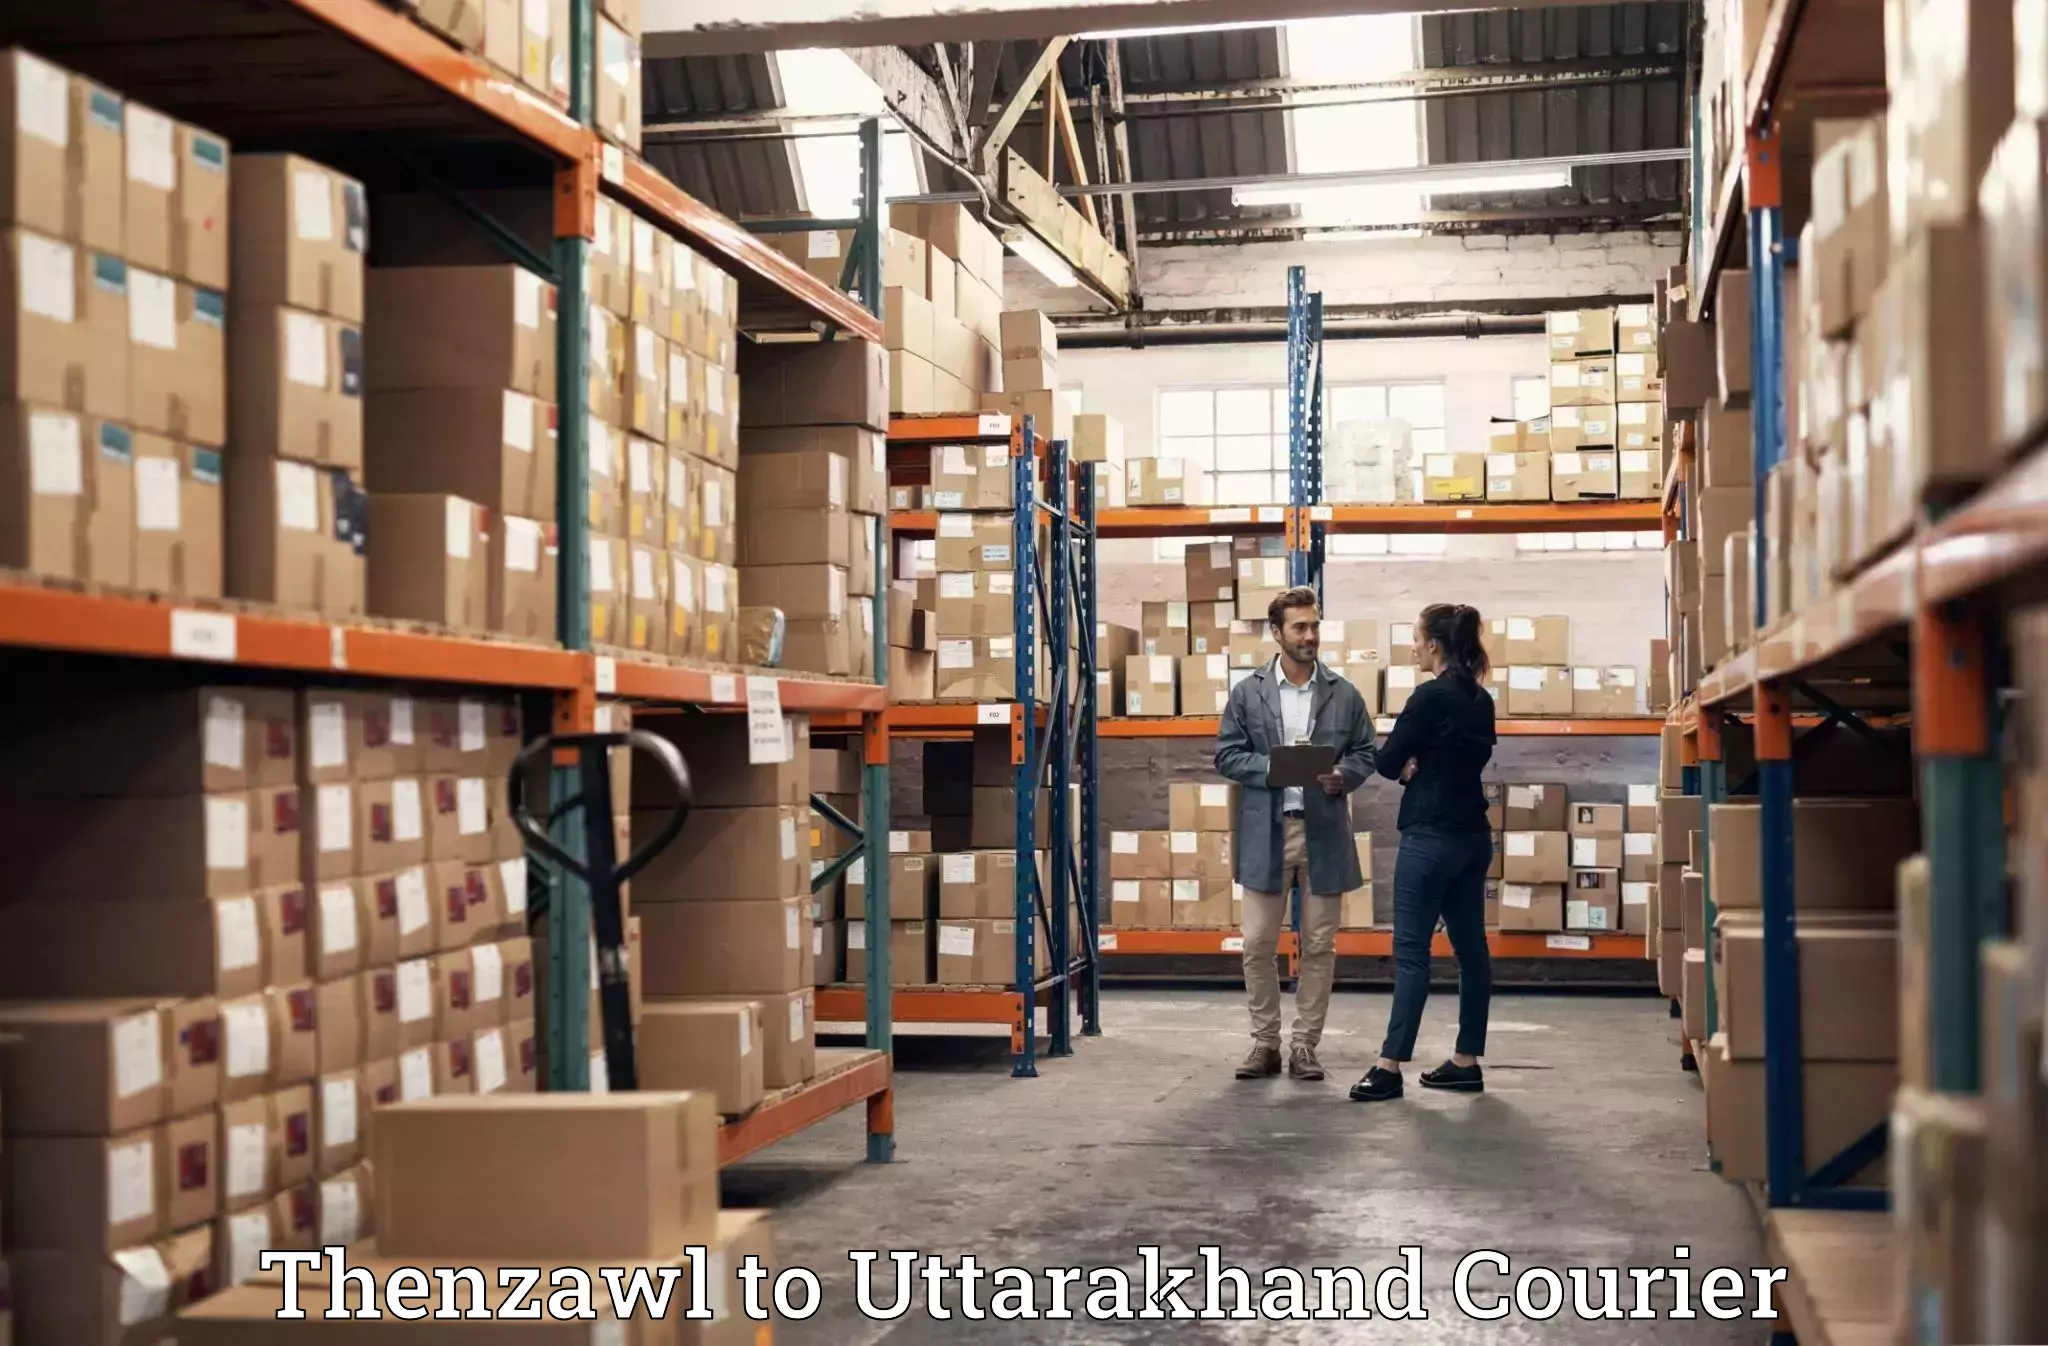 Quality relocation assistance Thenzawl to Gairsain